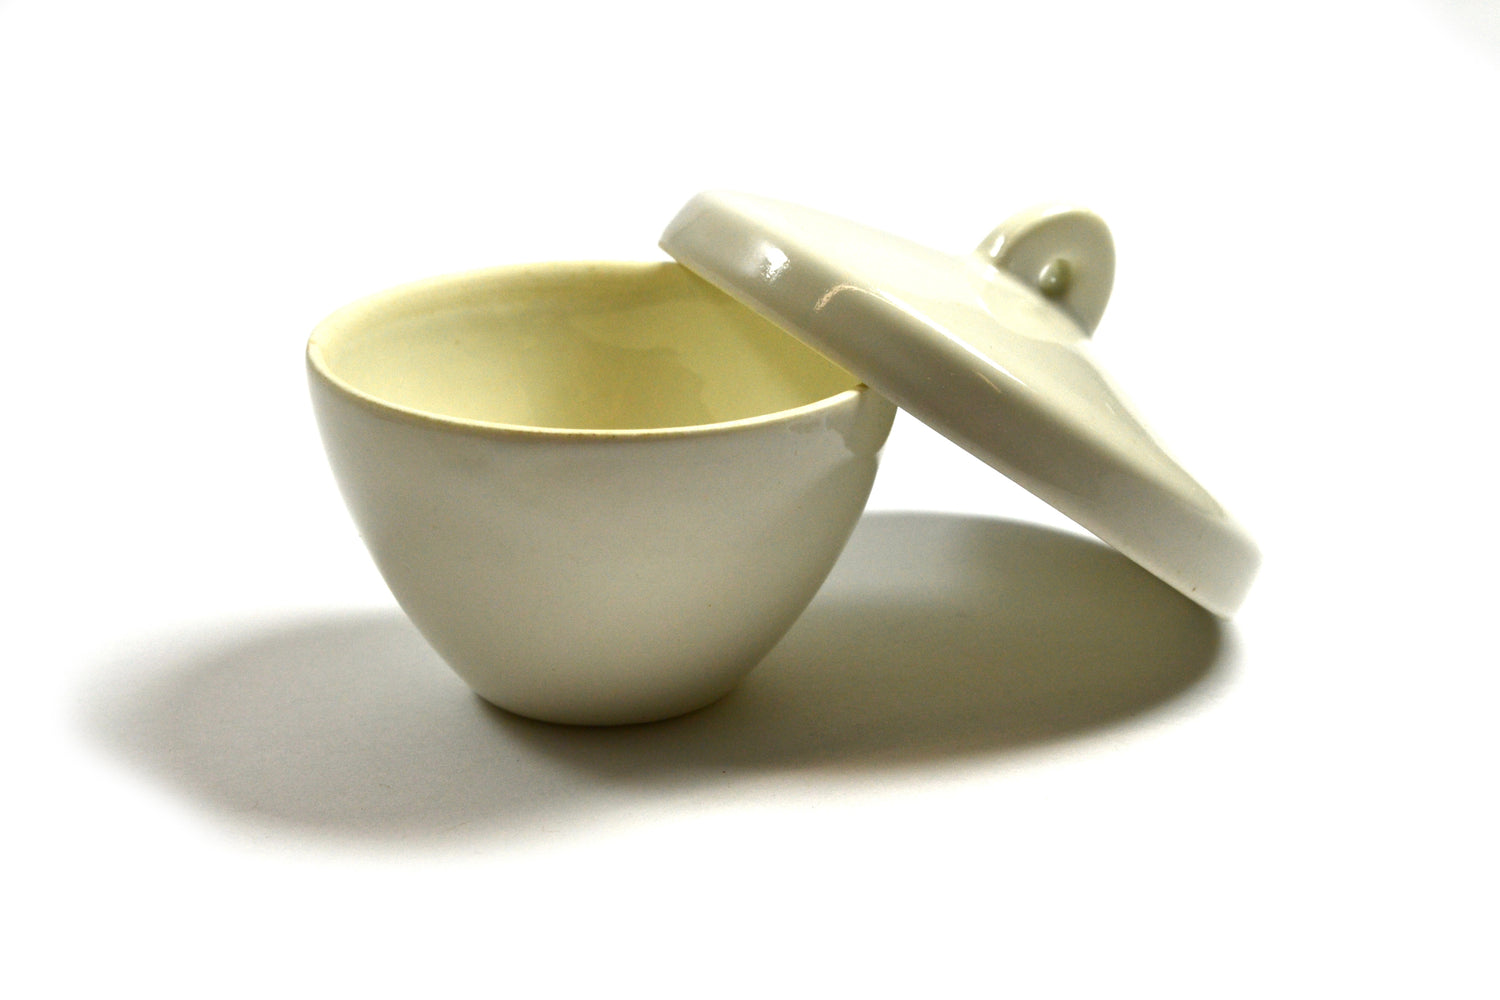 Porcelain Crucible with Lid, 30mL Capacity - Squat Form